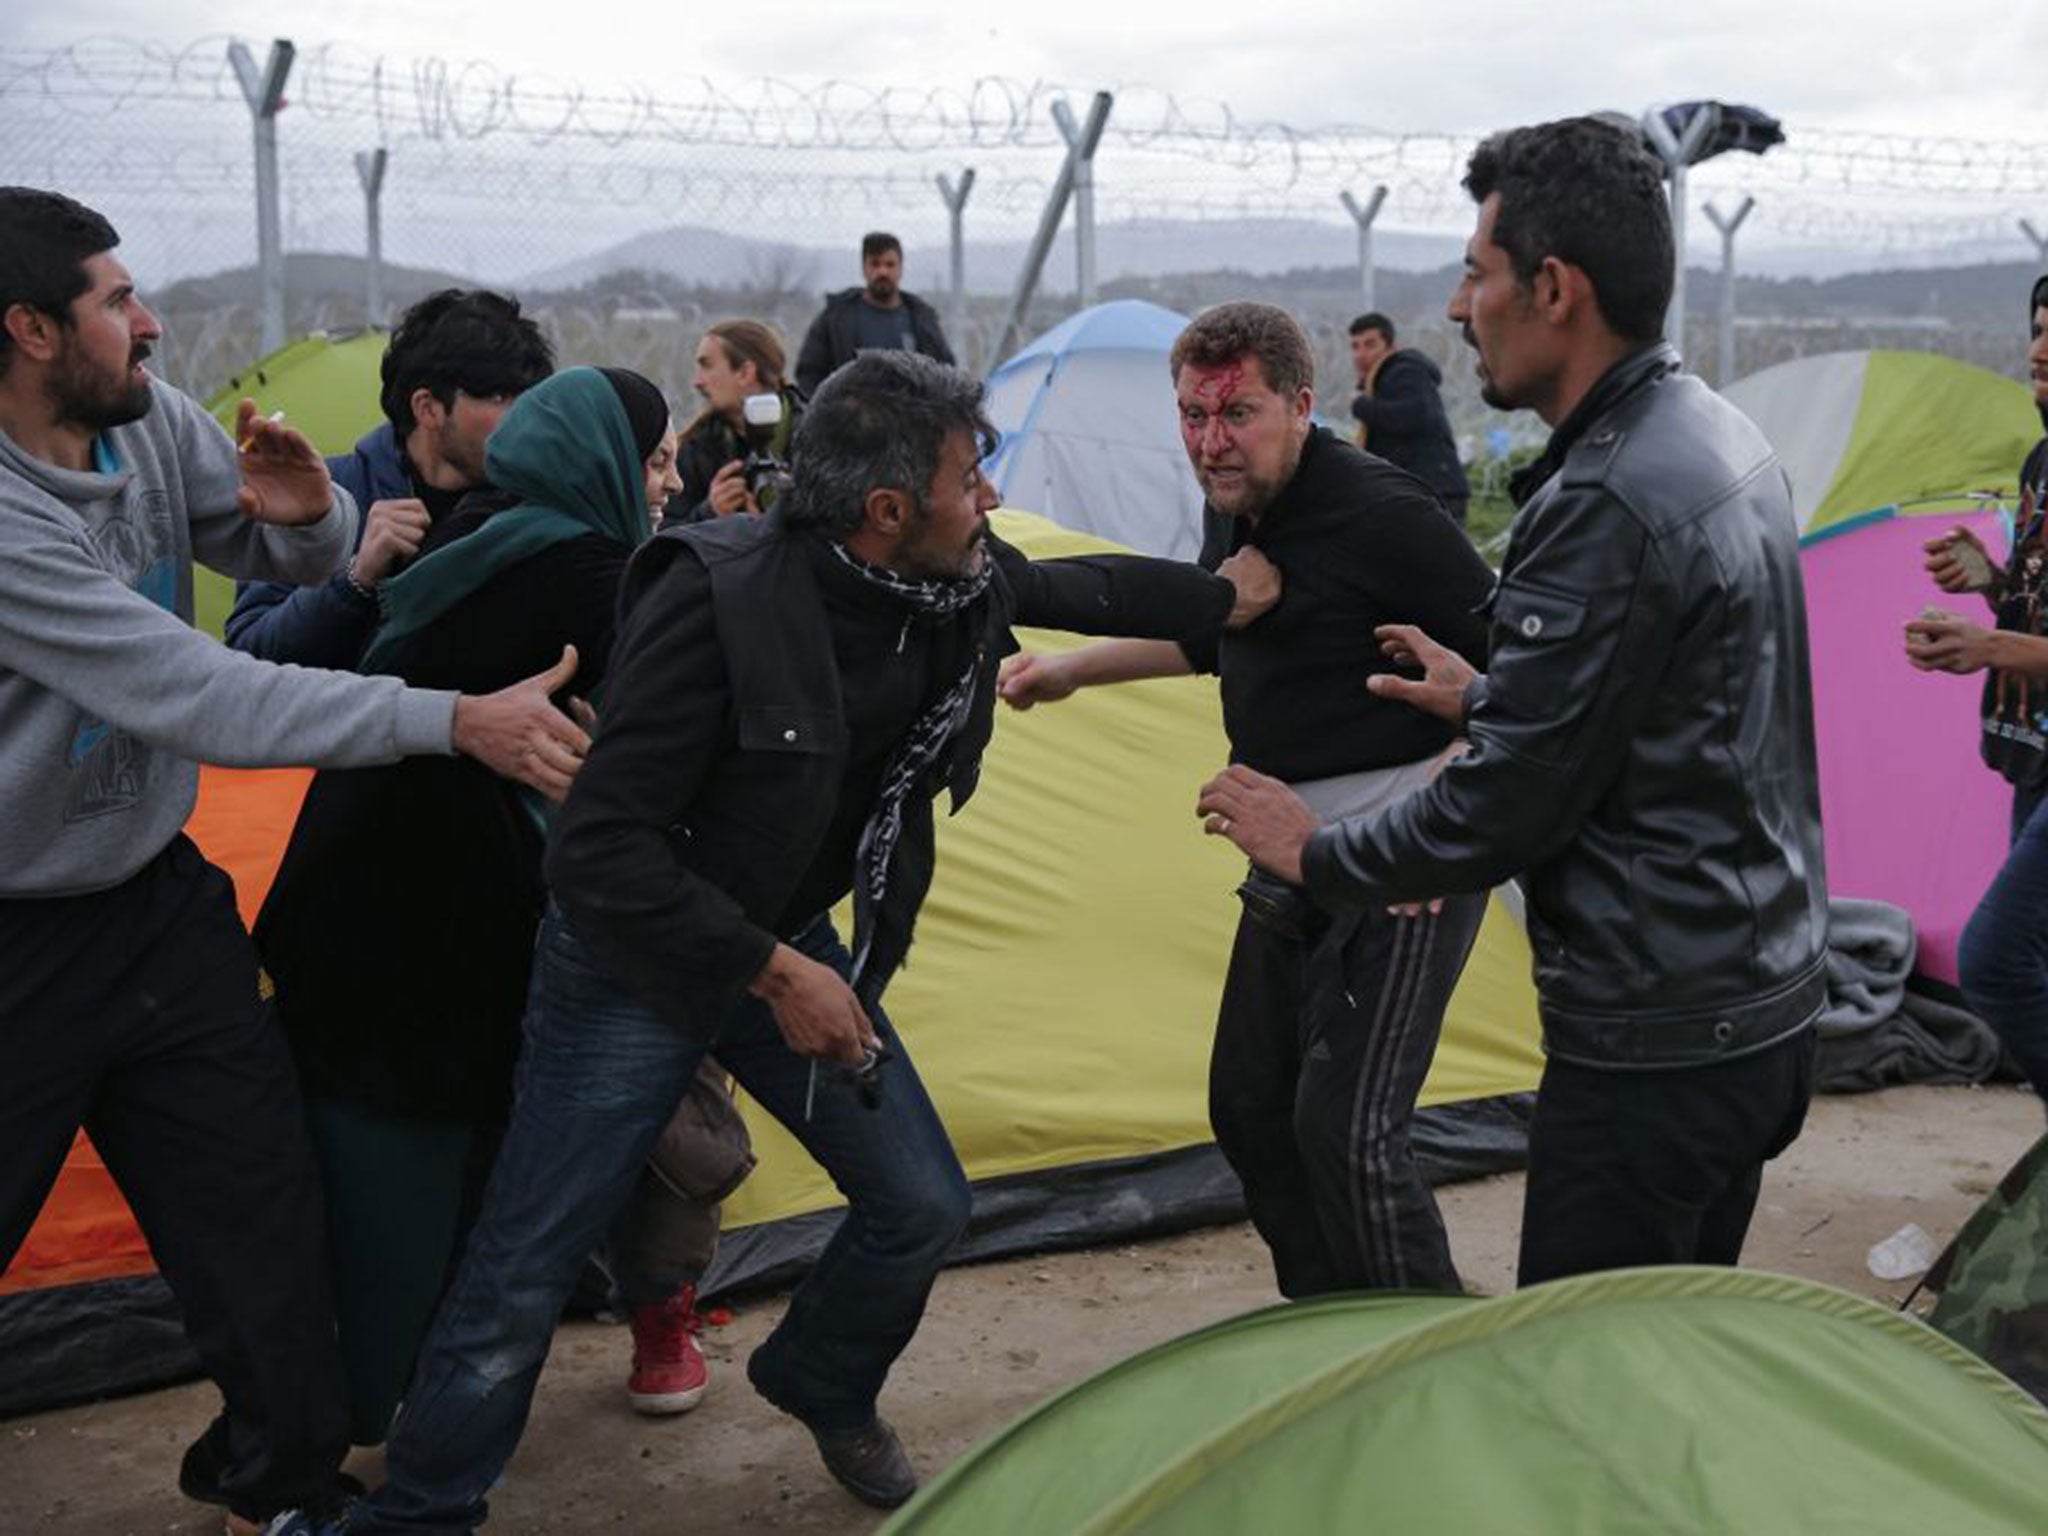 A fight breaks out between refugees in a camp at the Greek-Macedonian border near Idomeni, Greece